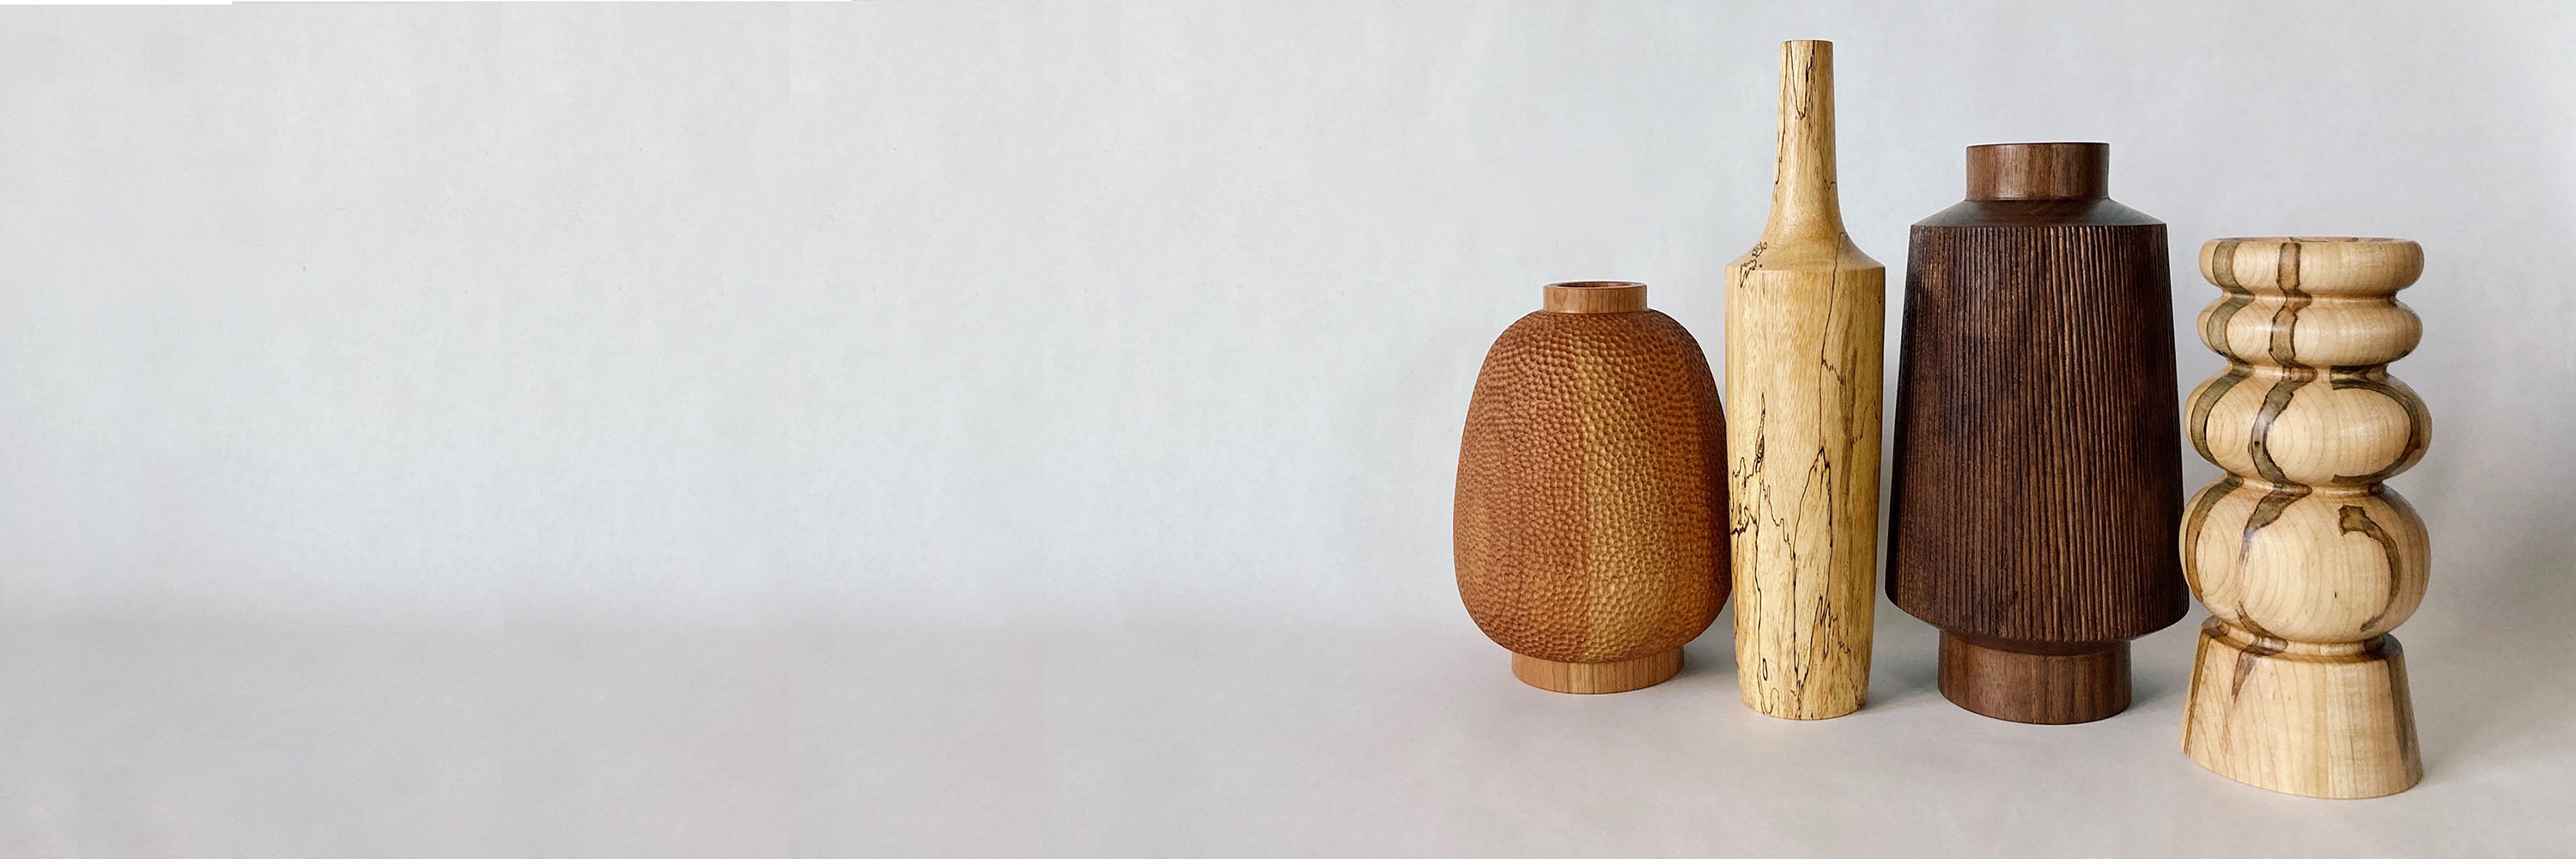 Four wooden vases stand in a cluster; they are each a different shade and shape